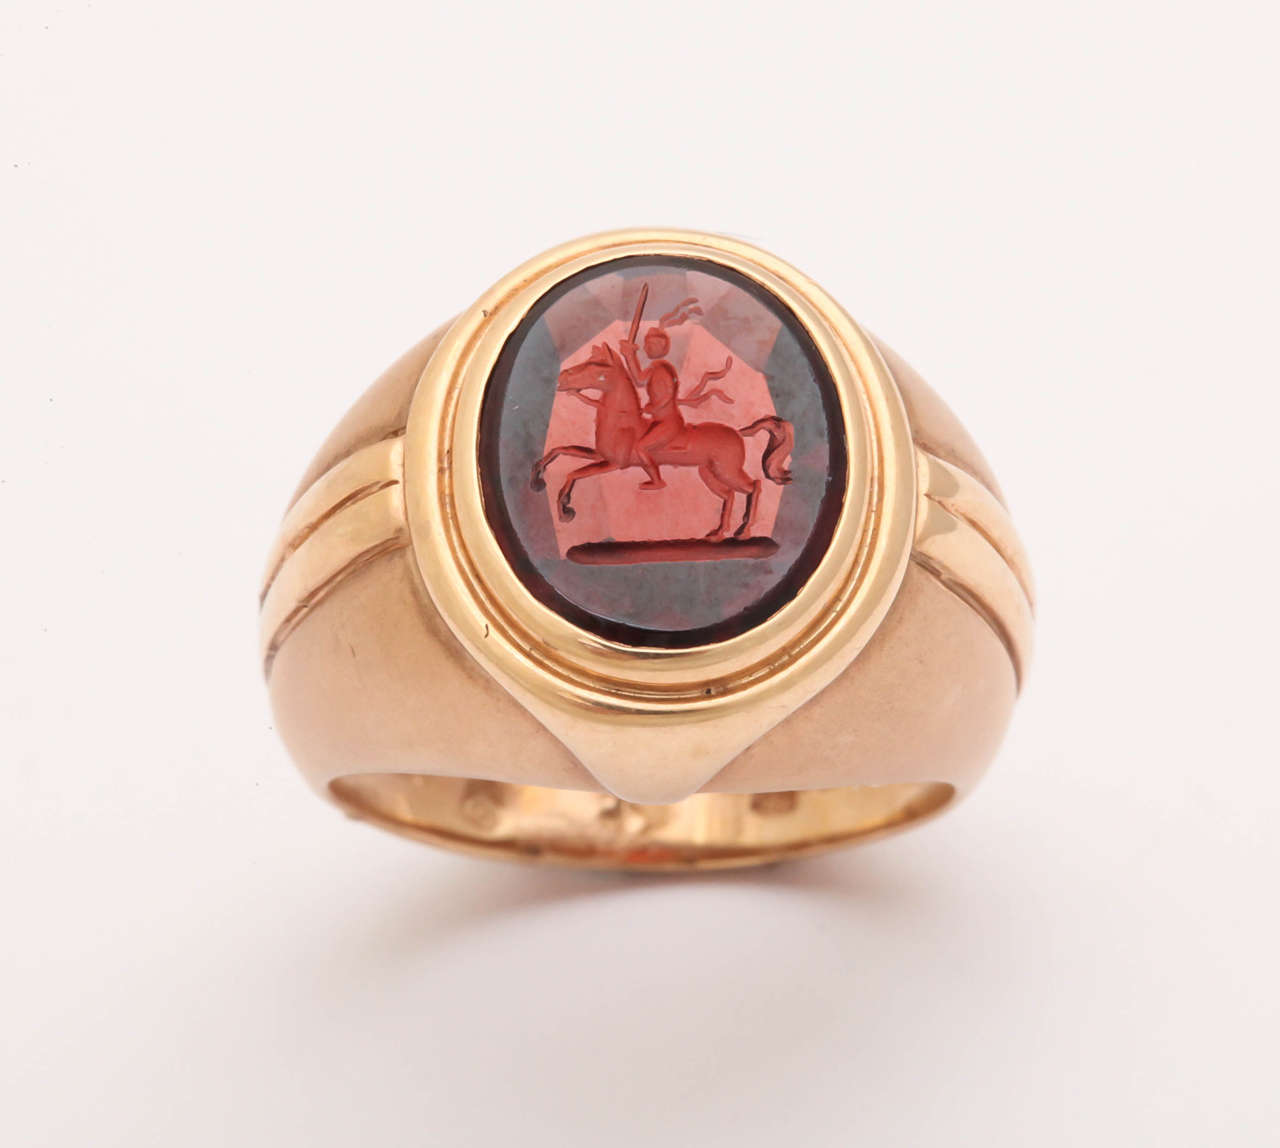 The design of this 18 kt rose gold ring has a Deco feel. The garnet intaglio was engraved by the expert stone cutters in Idar-Oberstein, Germany. The stone depicts a knight on horseback wielding a sword. This is a classic, elegant and impressive